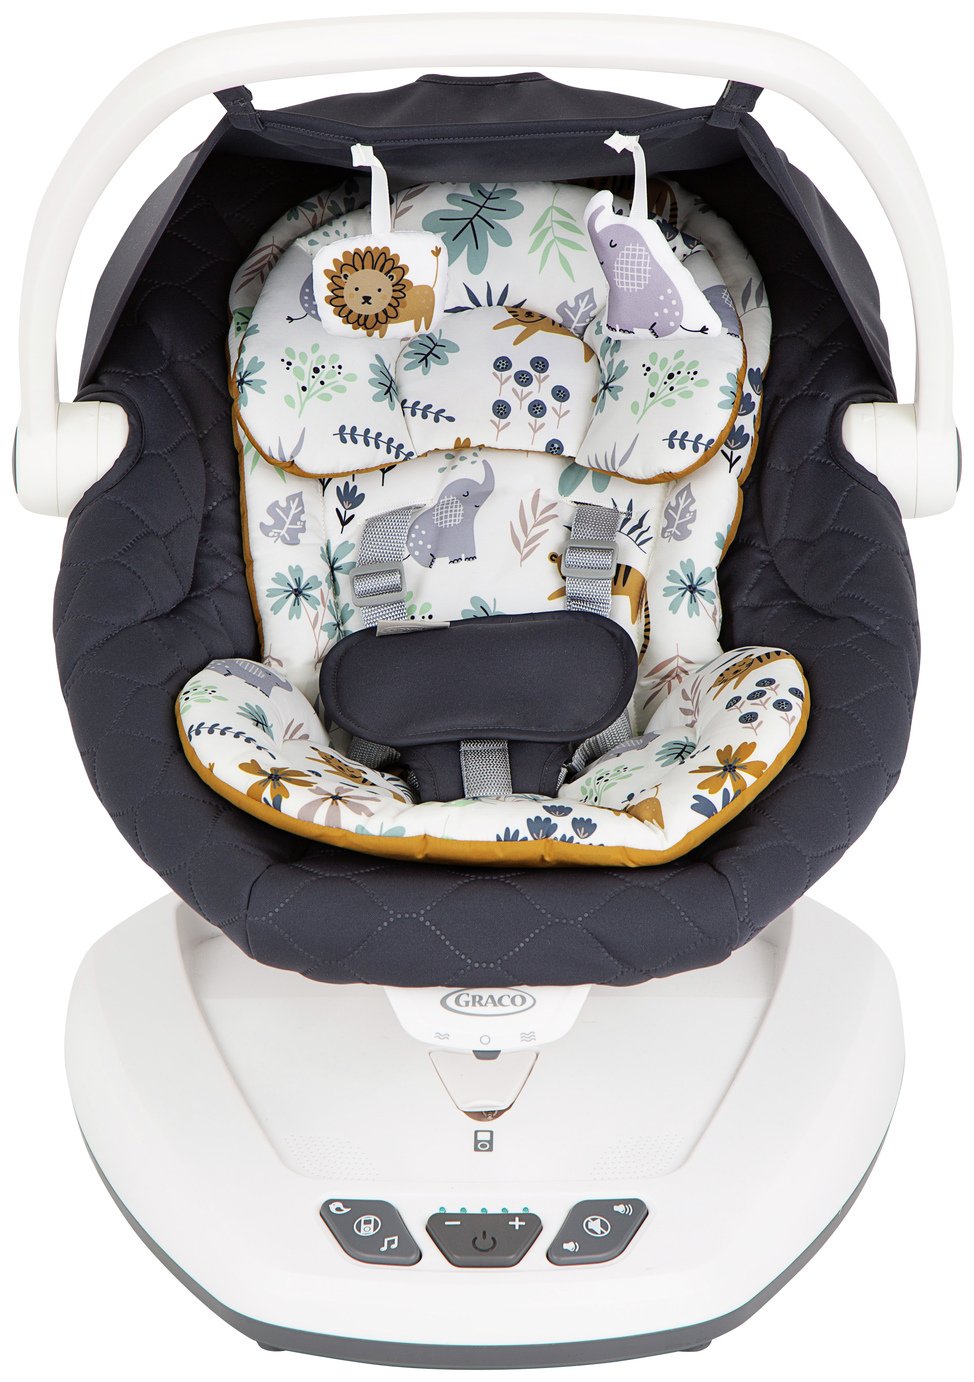 Graco Move with Me Soother review